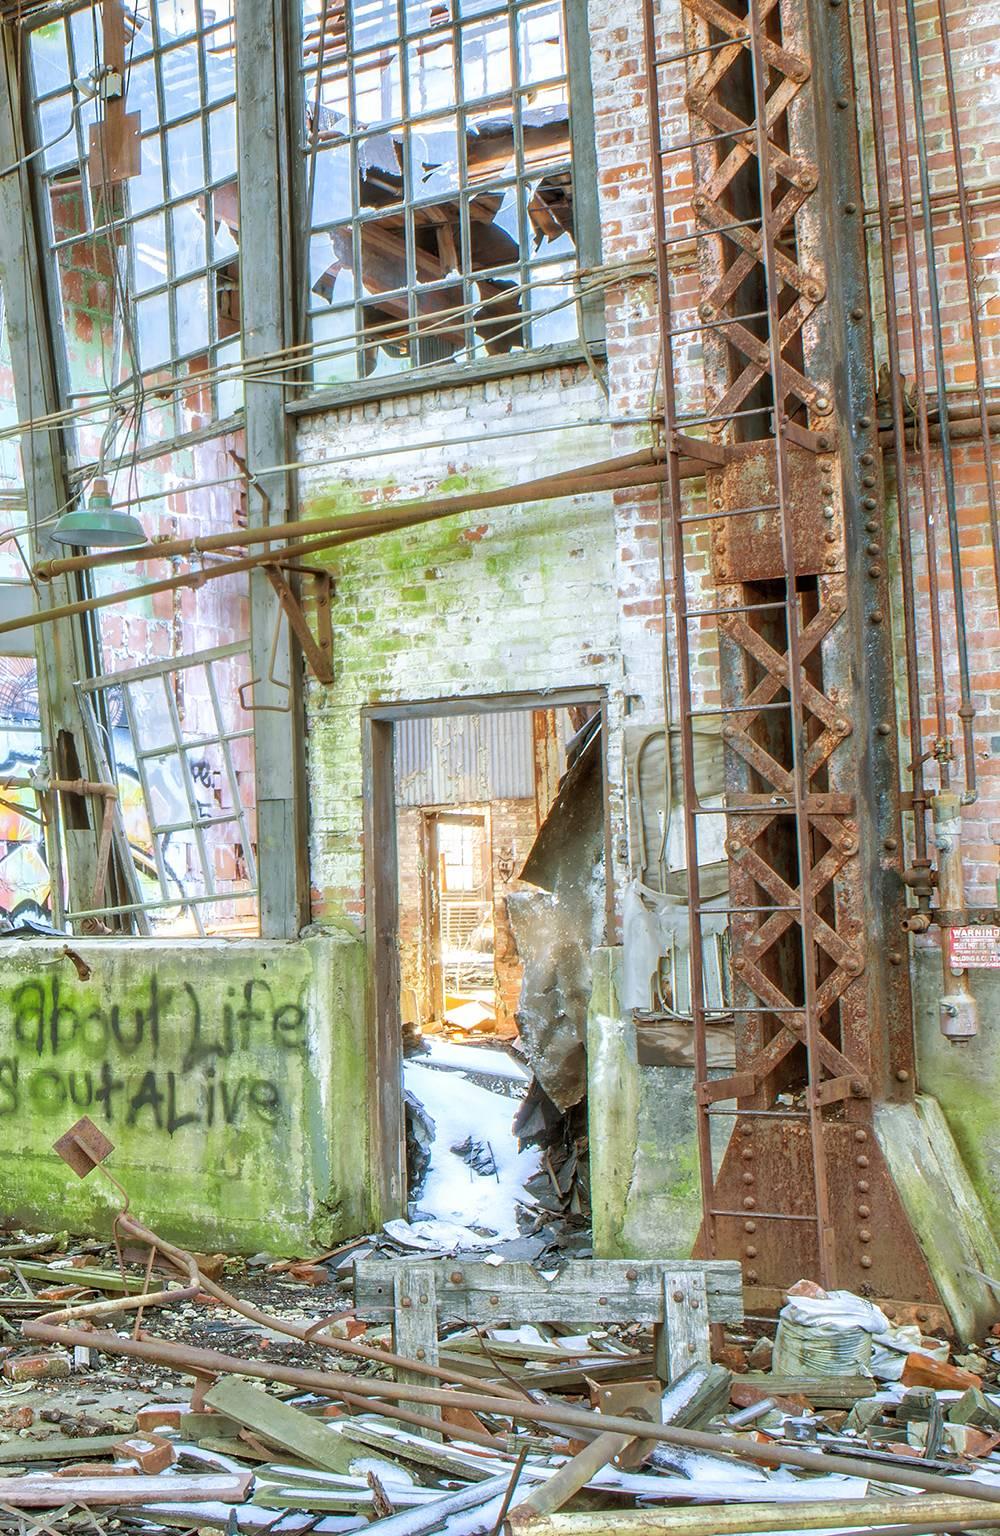 Rebecca Skinner’s “Endure” was photographed in an abandoned train repair yard. The 30 x 20 inch color photograph is of an industrial scene in a state of decay with cool tones of blue and green. The print has a satin finish and is infused directly